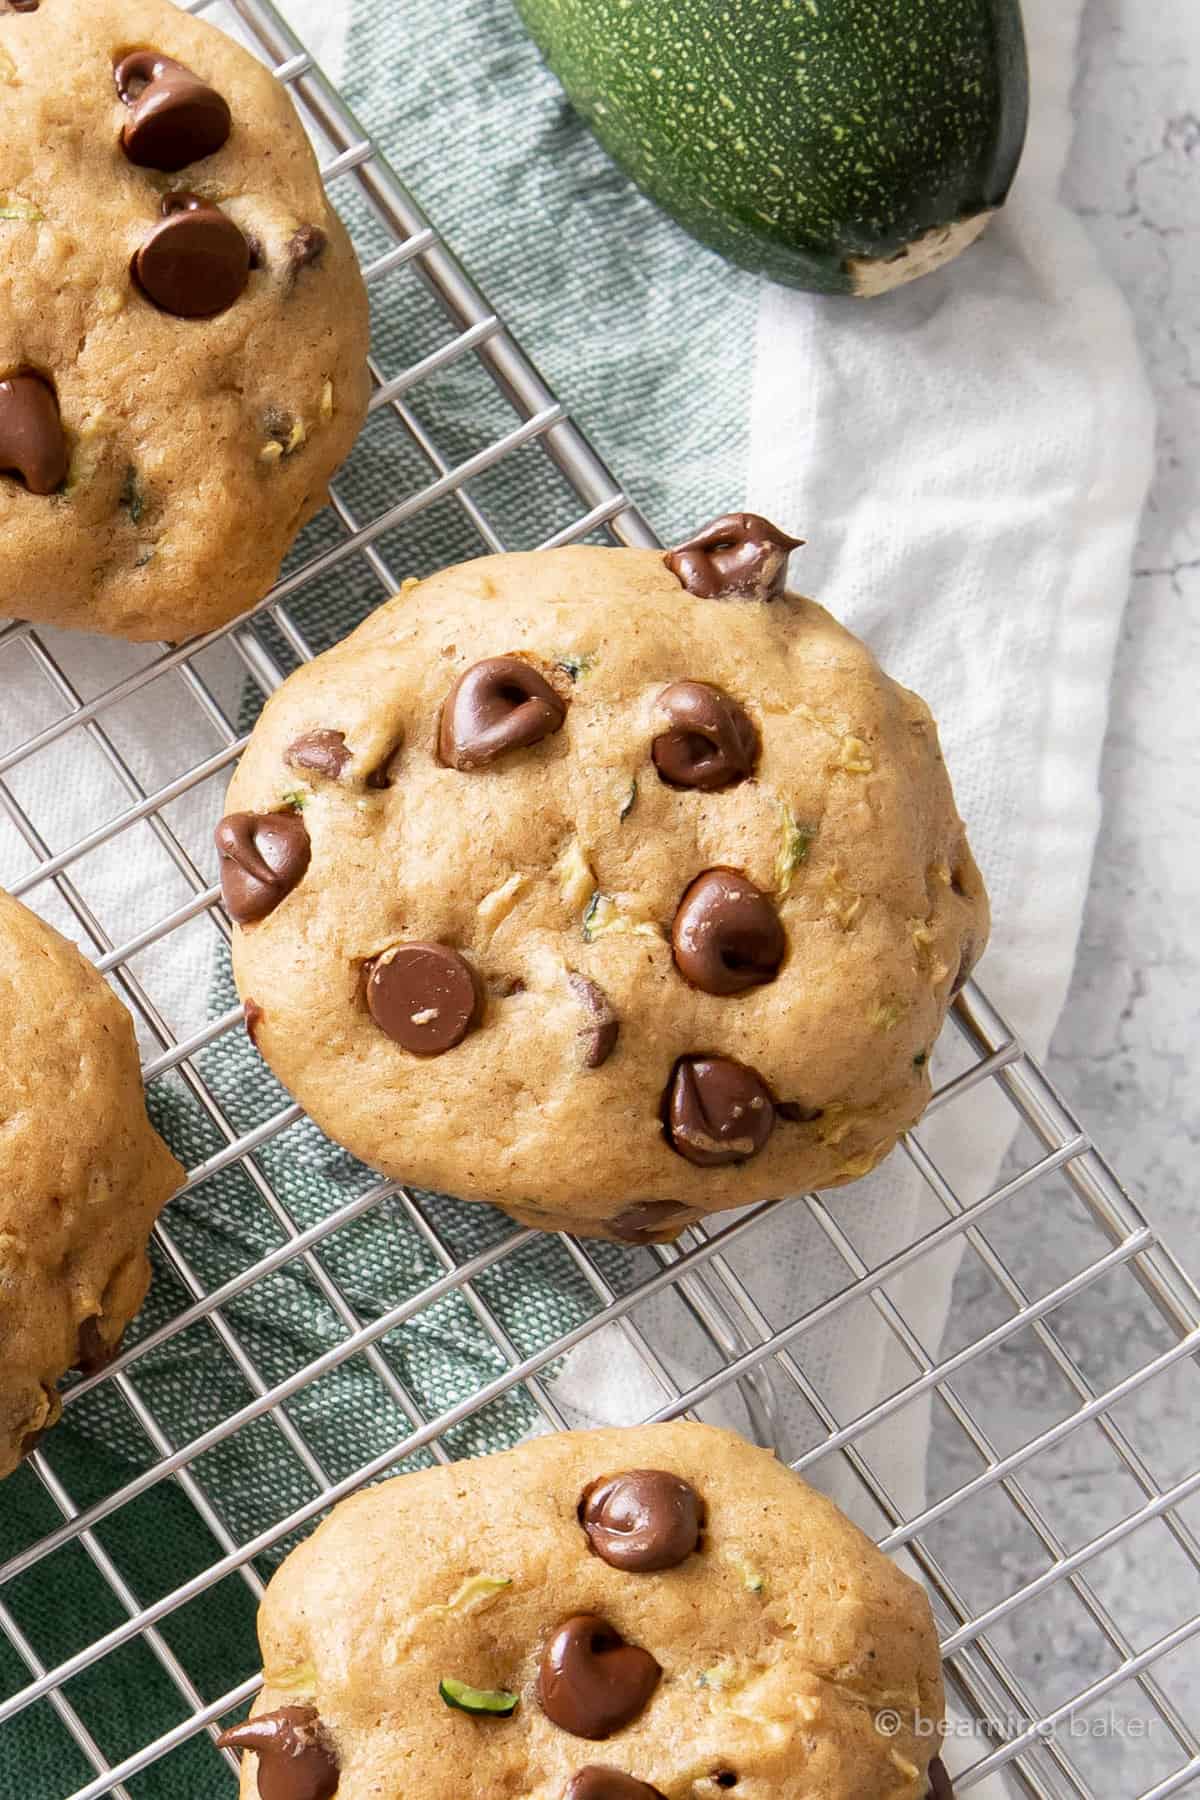 Melty chocolate chips on soft baked chocolate chip cookies with zucchini